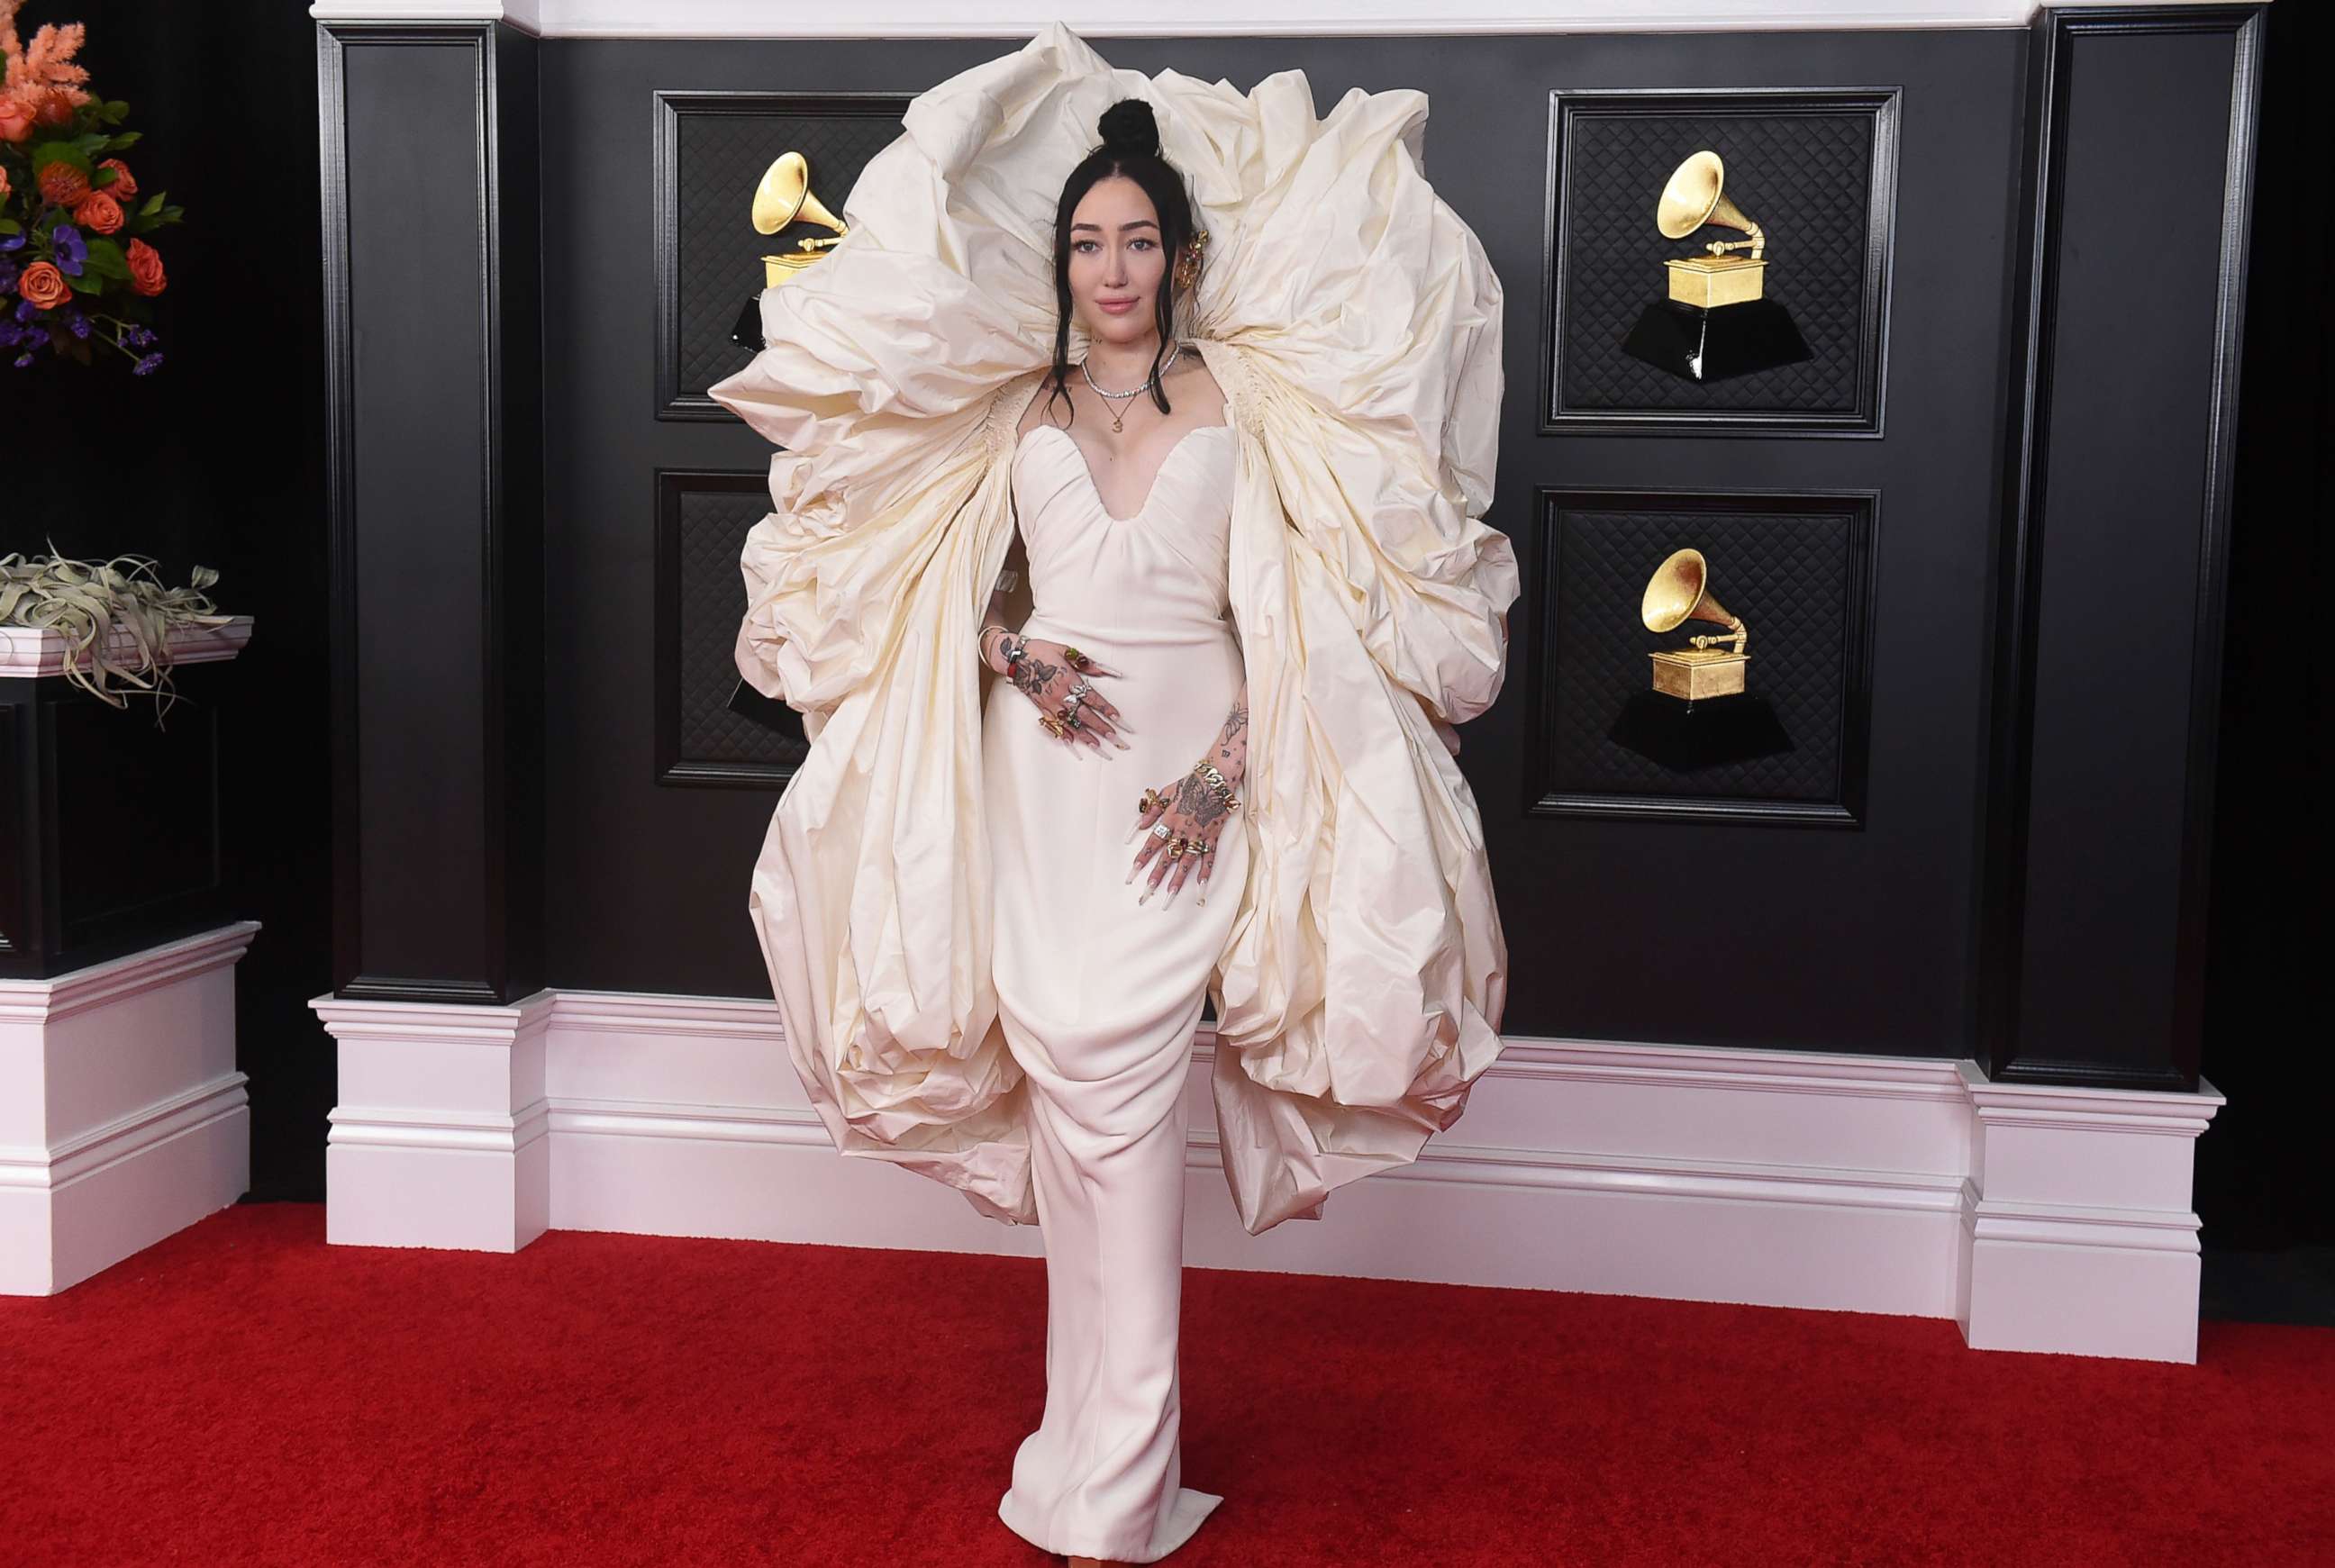 PHOTO: Noah Cyrus arrives at the 63rd annual Grammy Awards at the Los Angeles Convention Center, March 14, 2021.